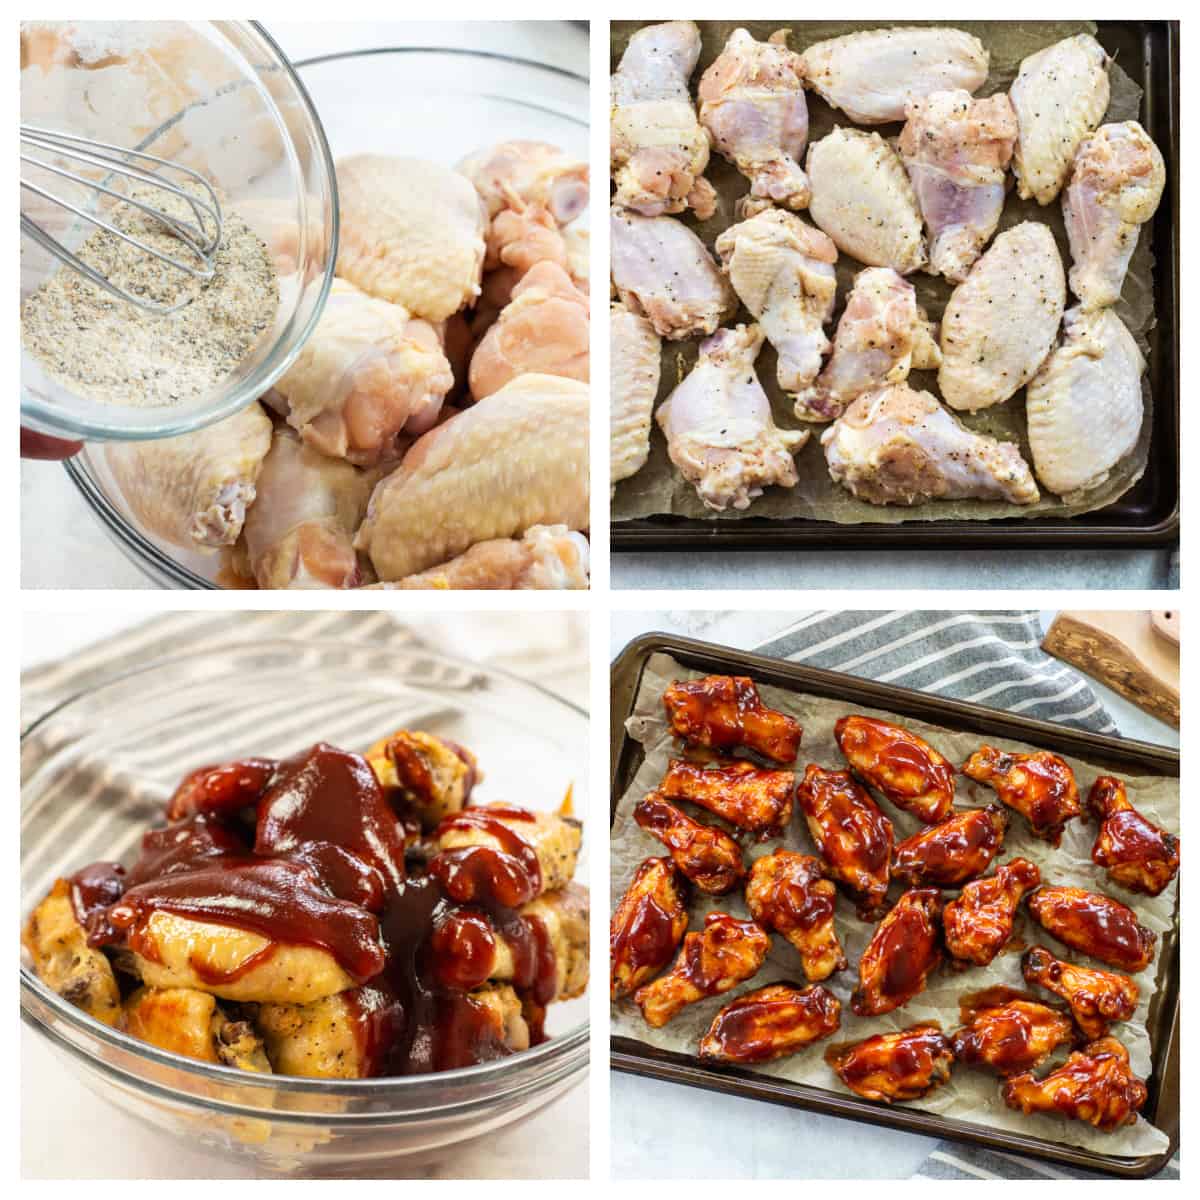 Collage showing how to make baked bbq chicken wings.